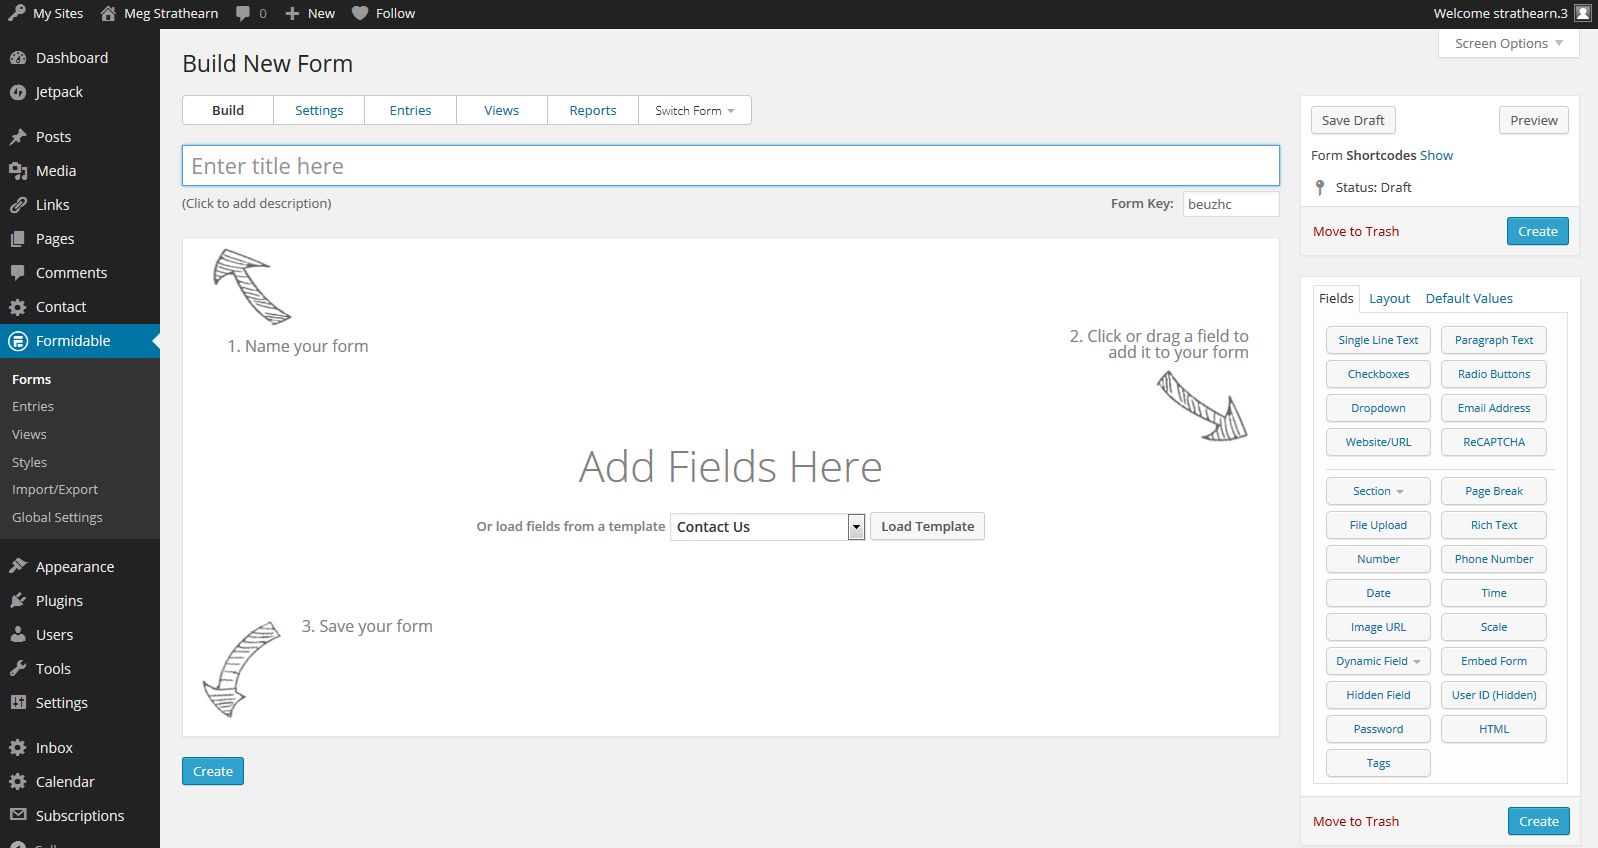 Build New Form page with title field, add field options, and create button in U.OSU